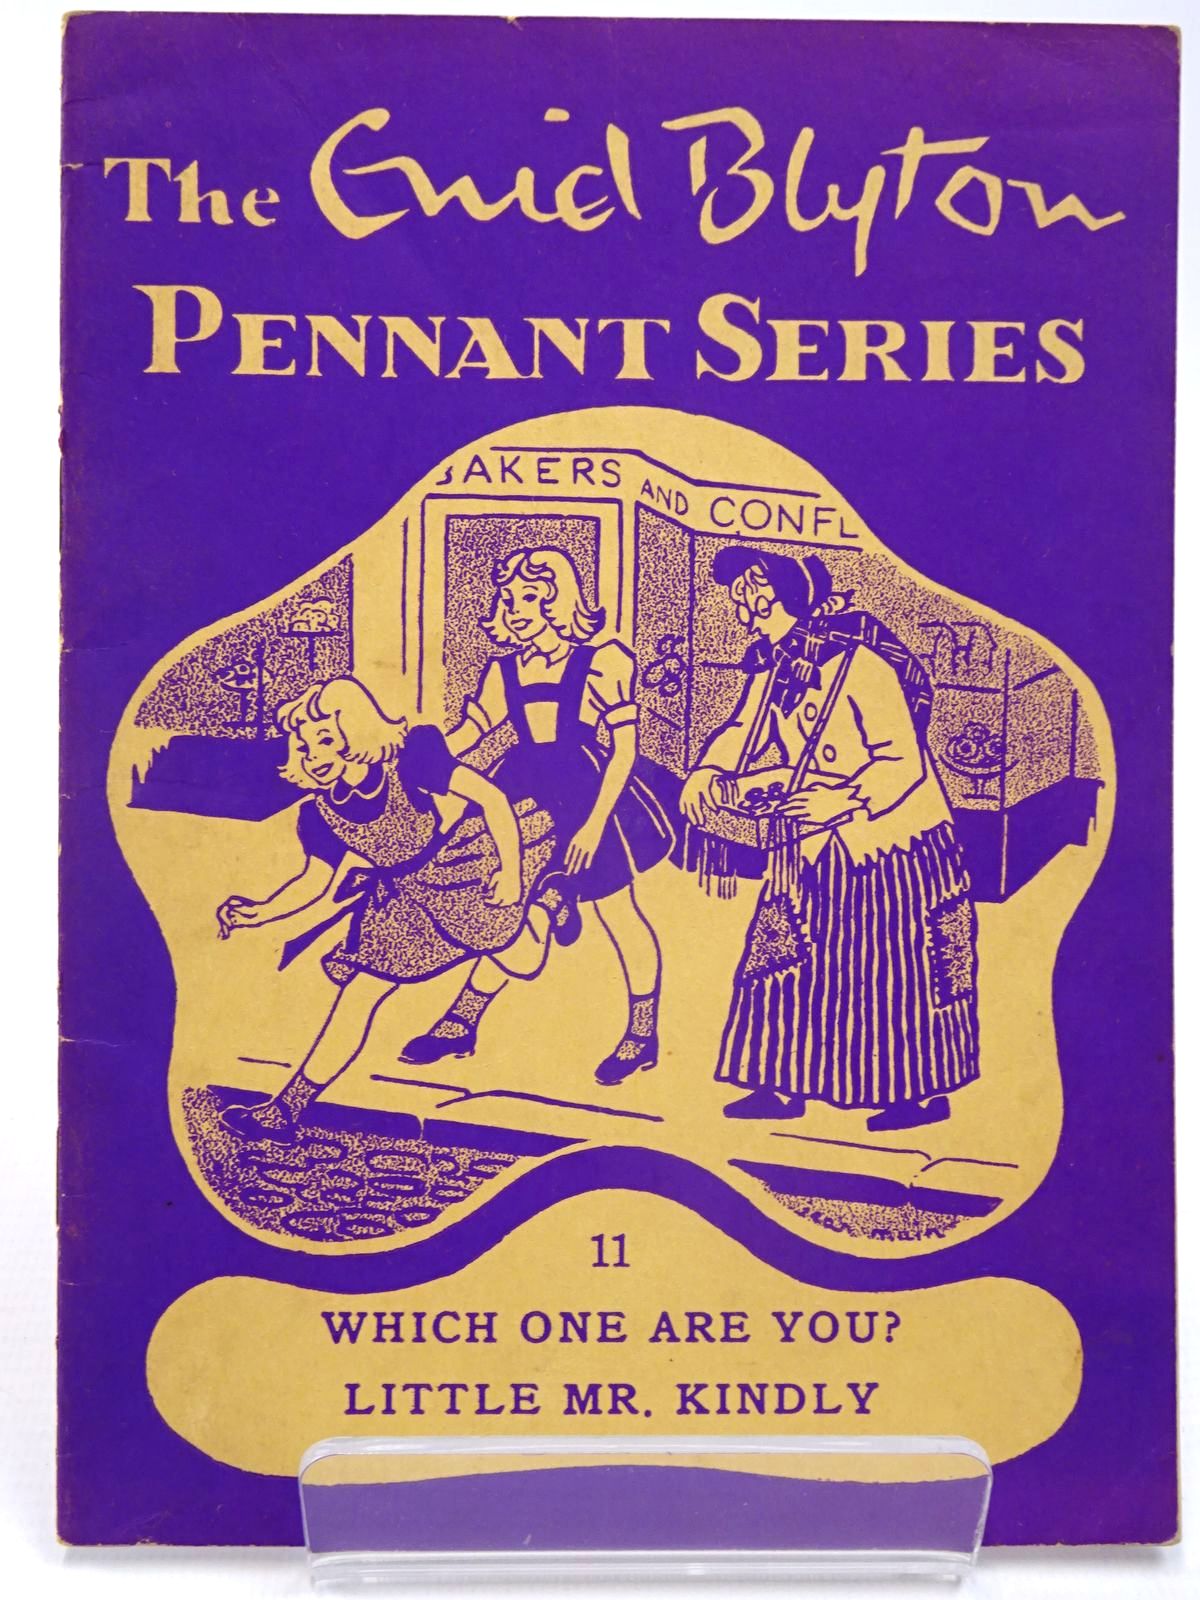 Photo of THE ENID BLYTON PENNANT SERIES No. 11 WHICH ONE ARE YOU? / LITTLE MR. KINDLY written by Blyton, Enid illustrated by Soper, Eileen
Main, Jean published by Macmillan & Co. Ltd. (STOCK CODE: 2130521)  for sale by Stella & Rose's Books